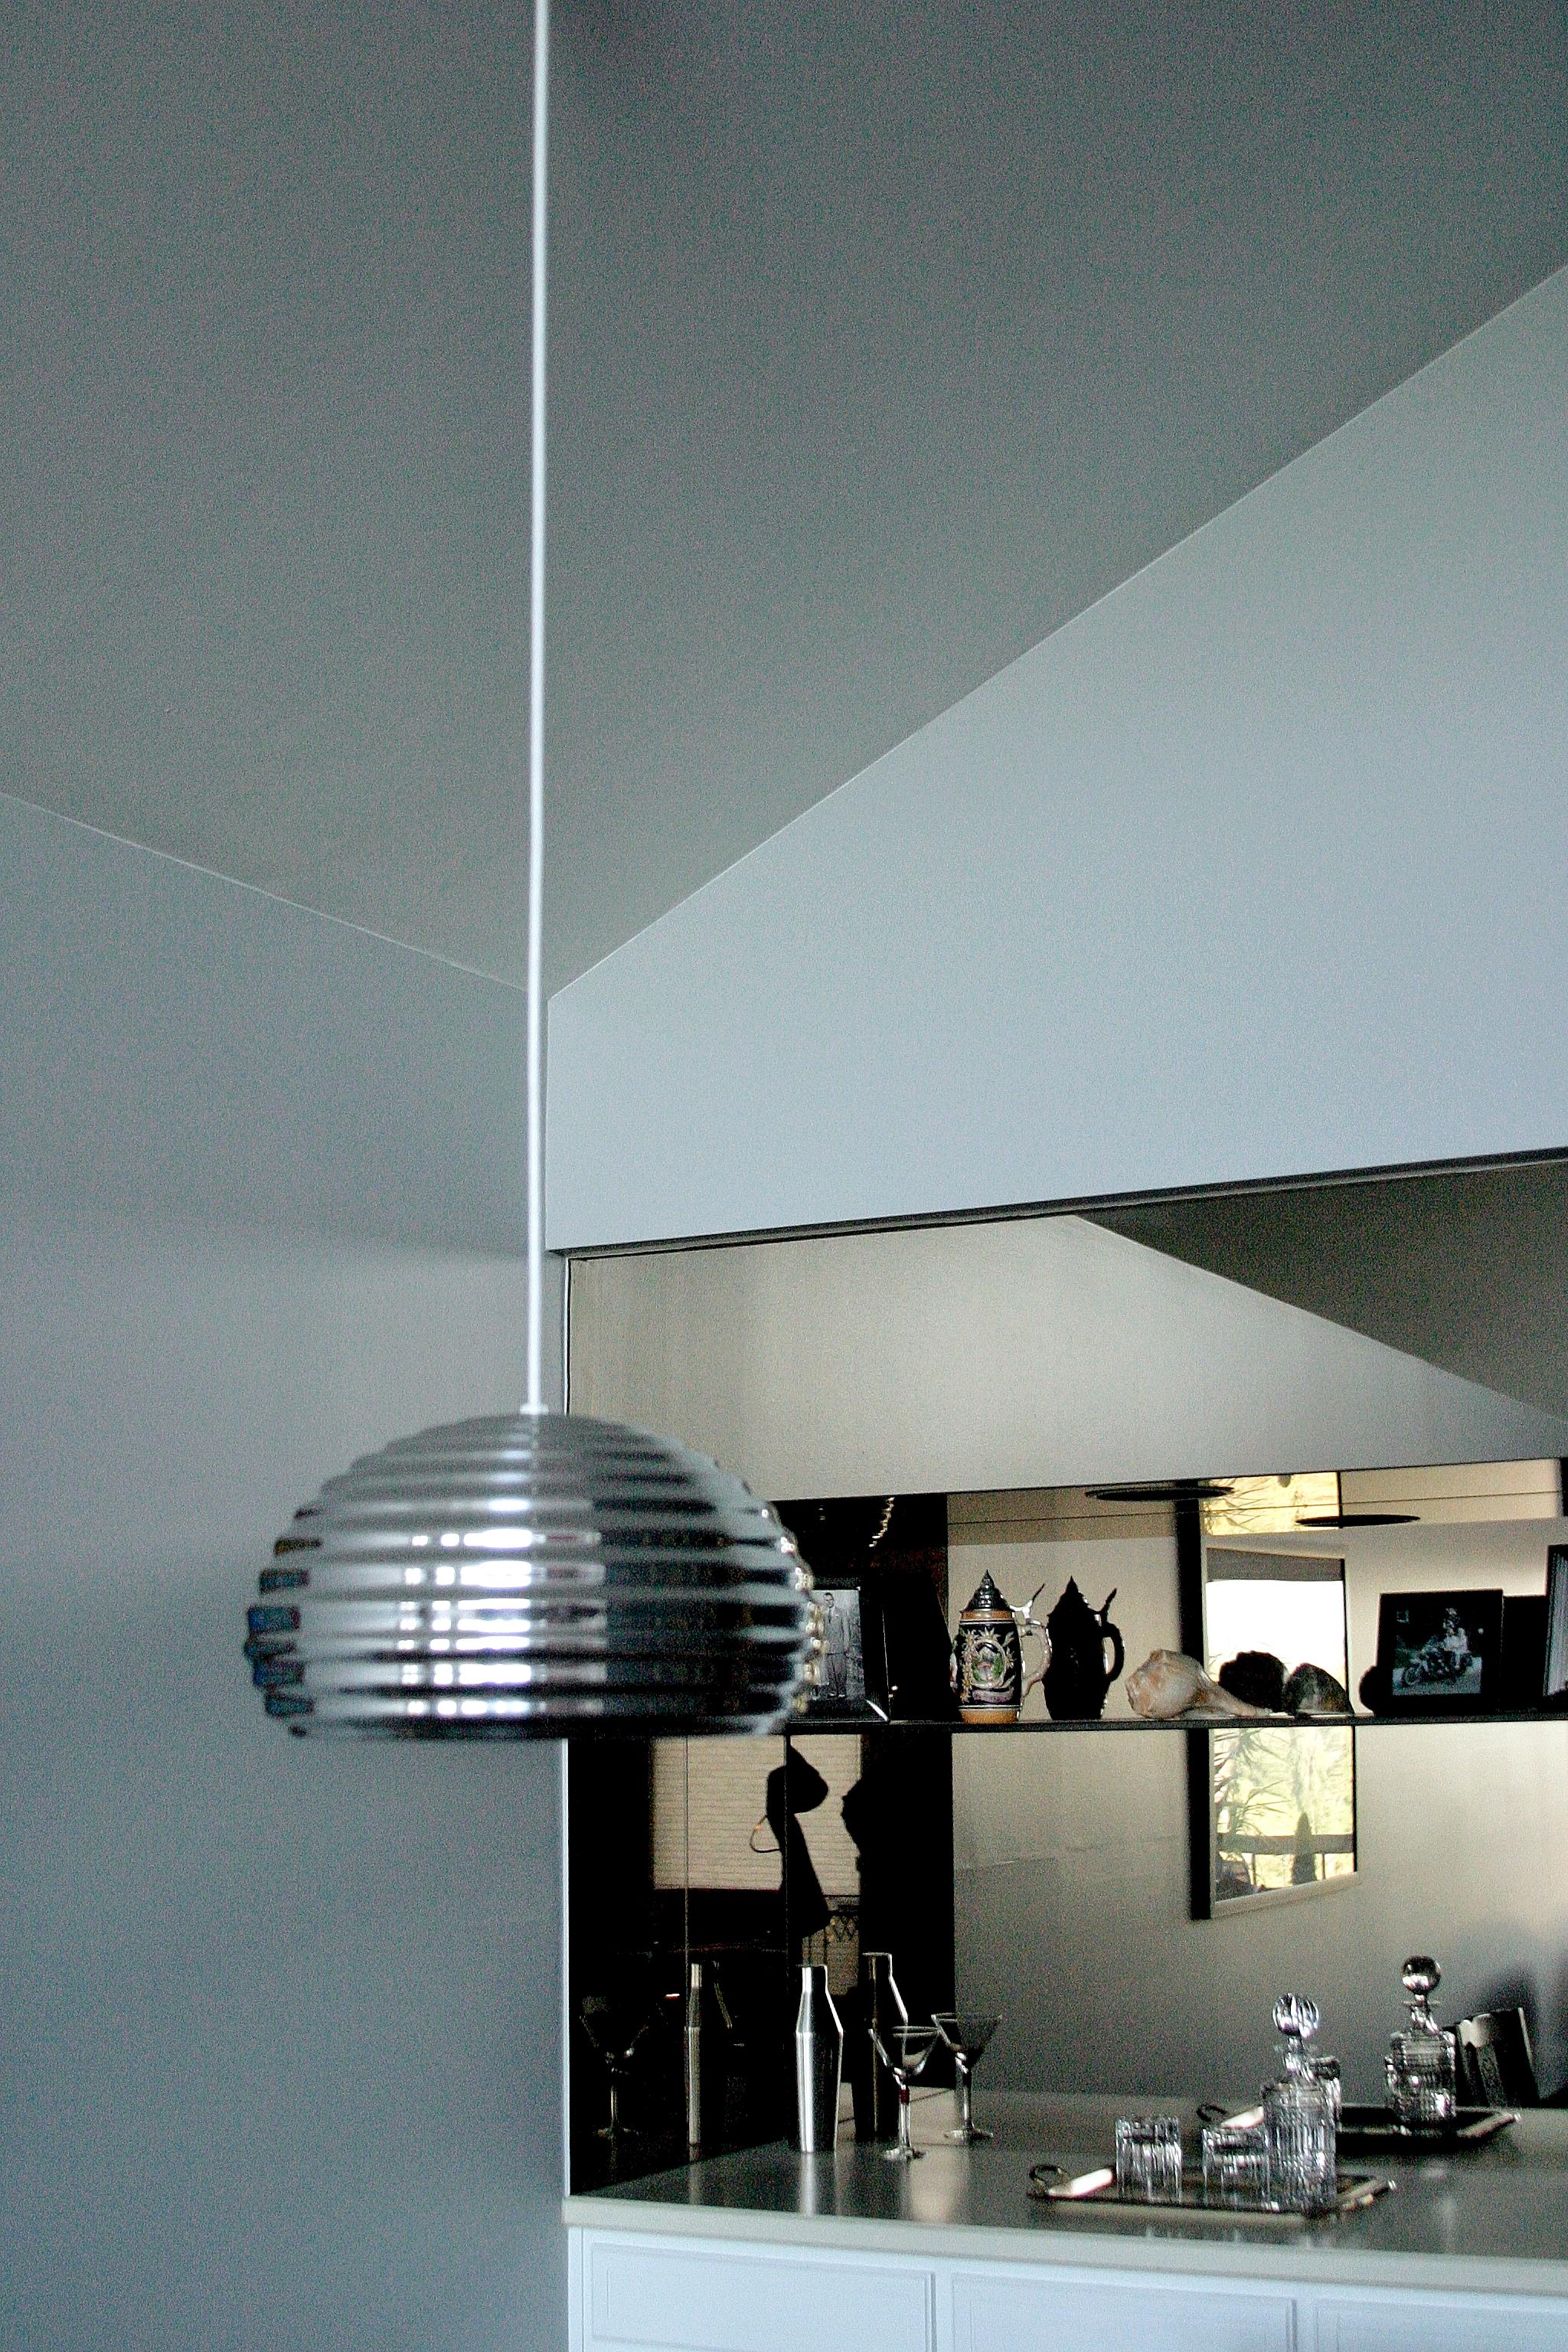 The shiny pendant light reflects the sparkle of the mirrored bar cabinet.